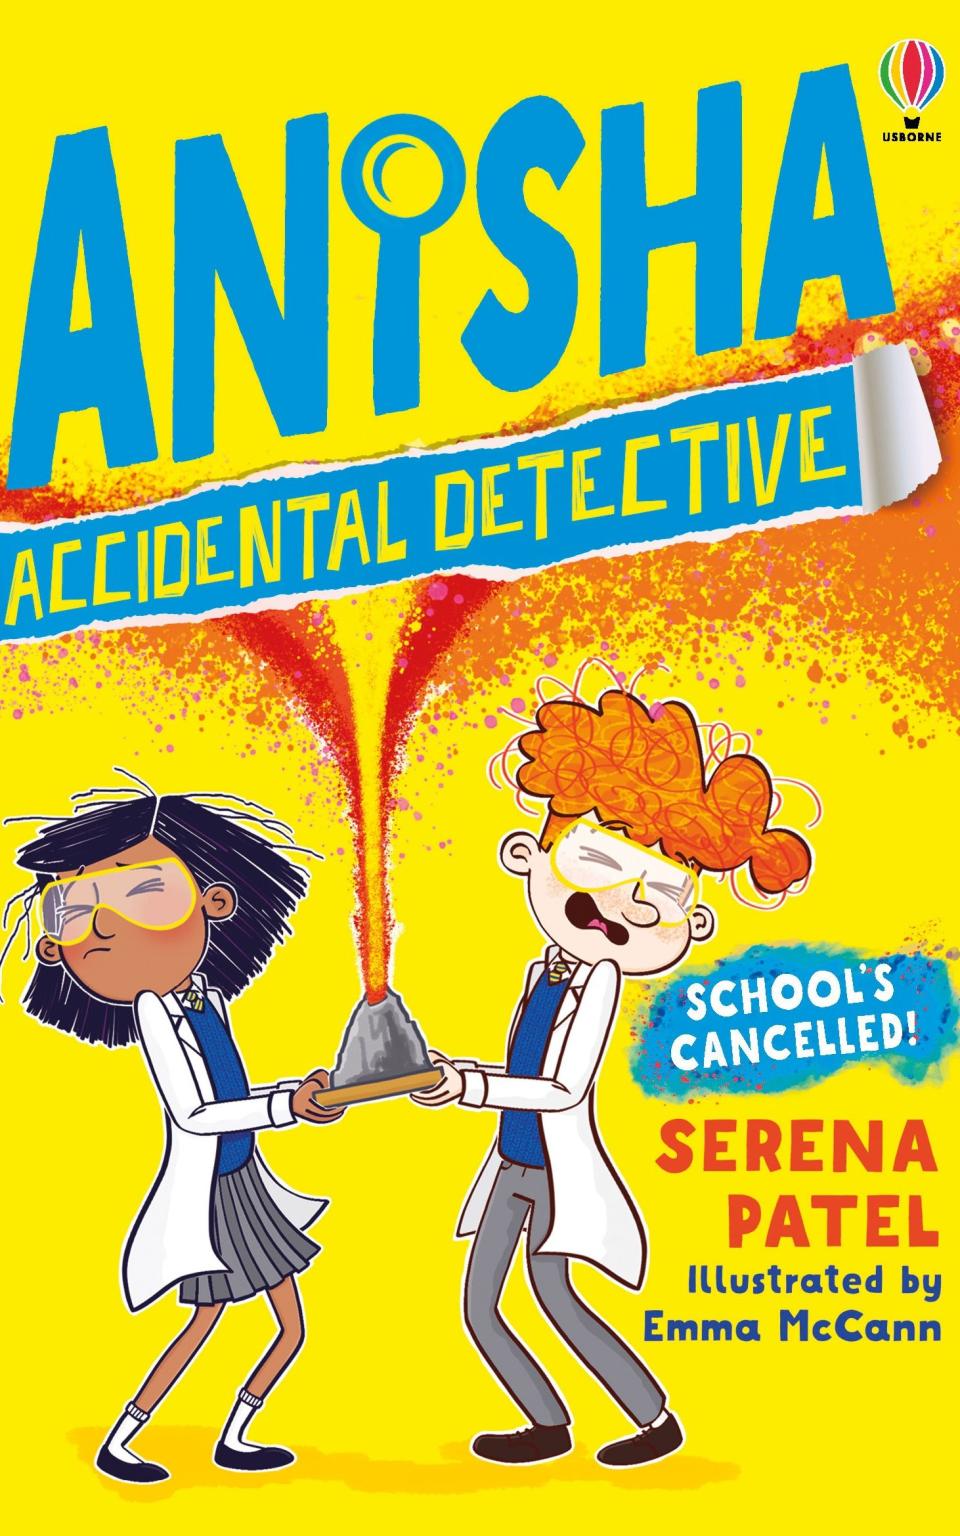 The second book in the Anisha, Accidental Detective series is out this week